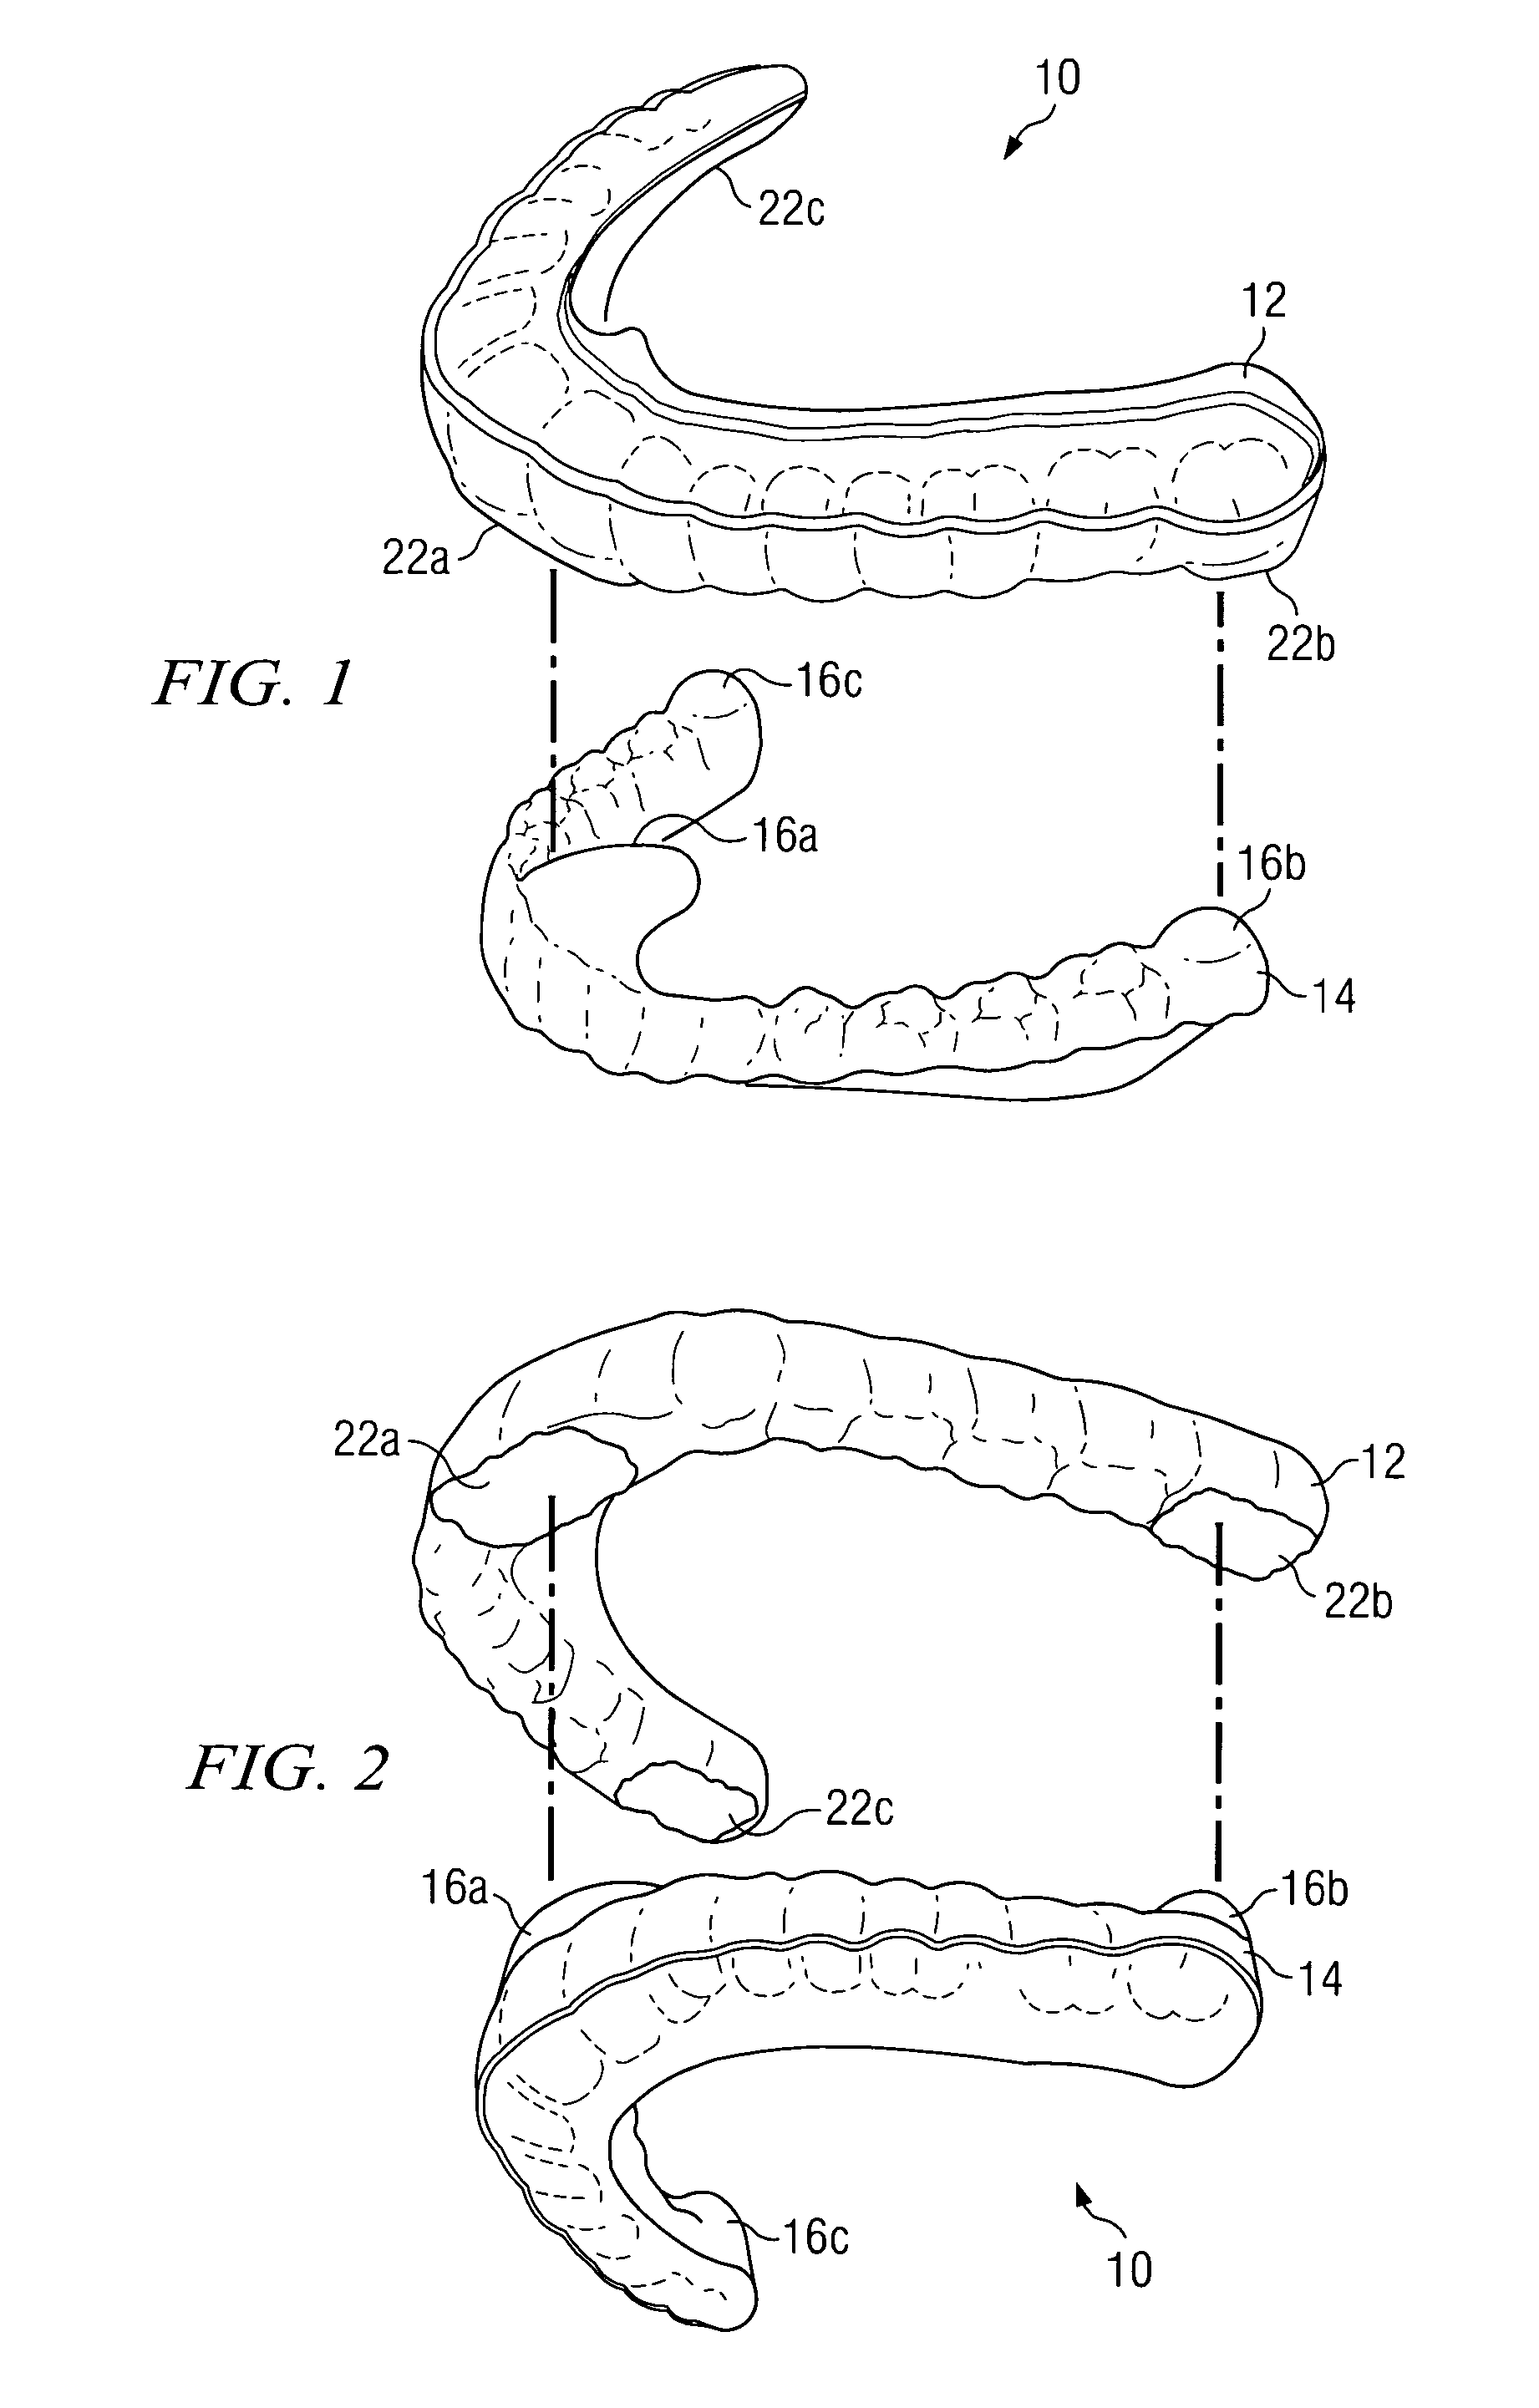 Oral appliance for maintaining stability of one or more aspects of a user's masticatory system